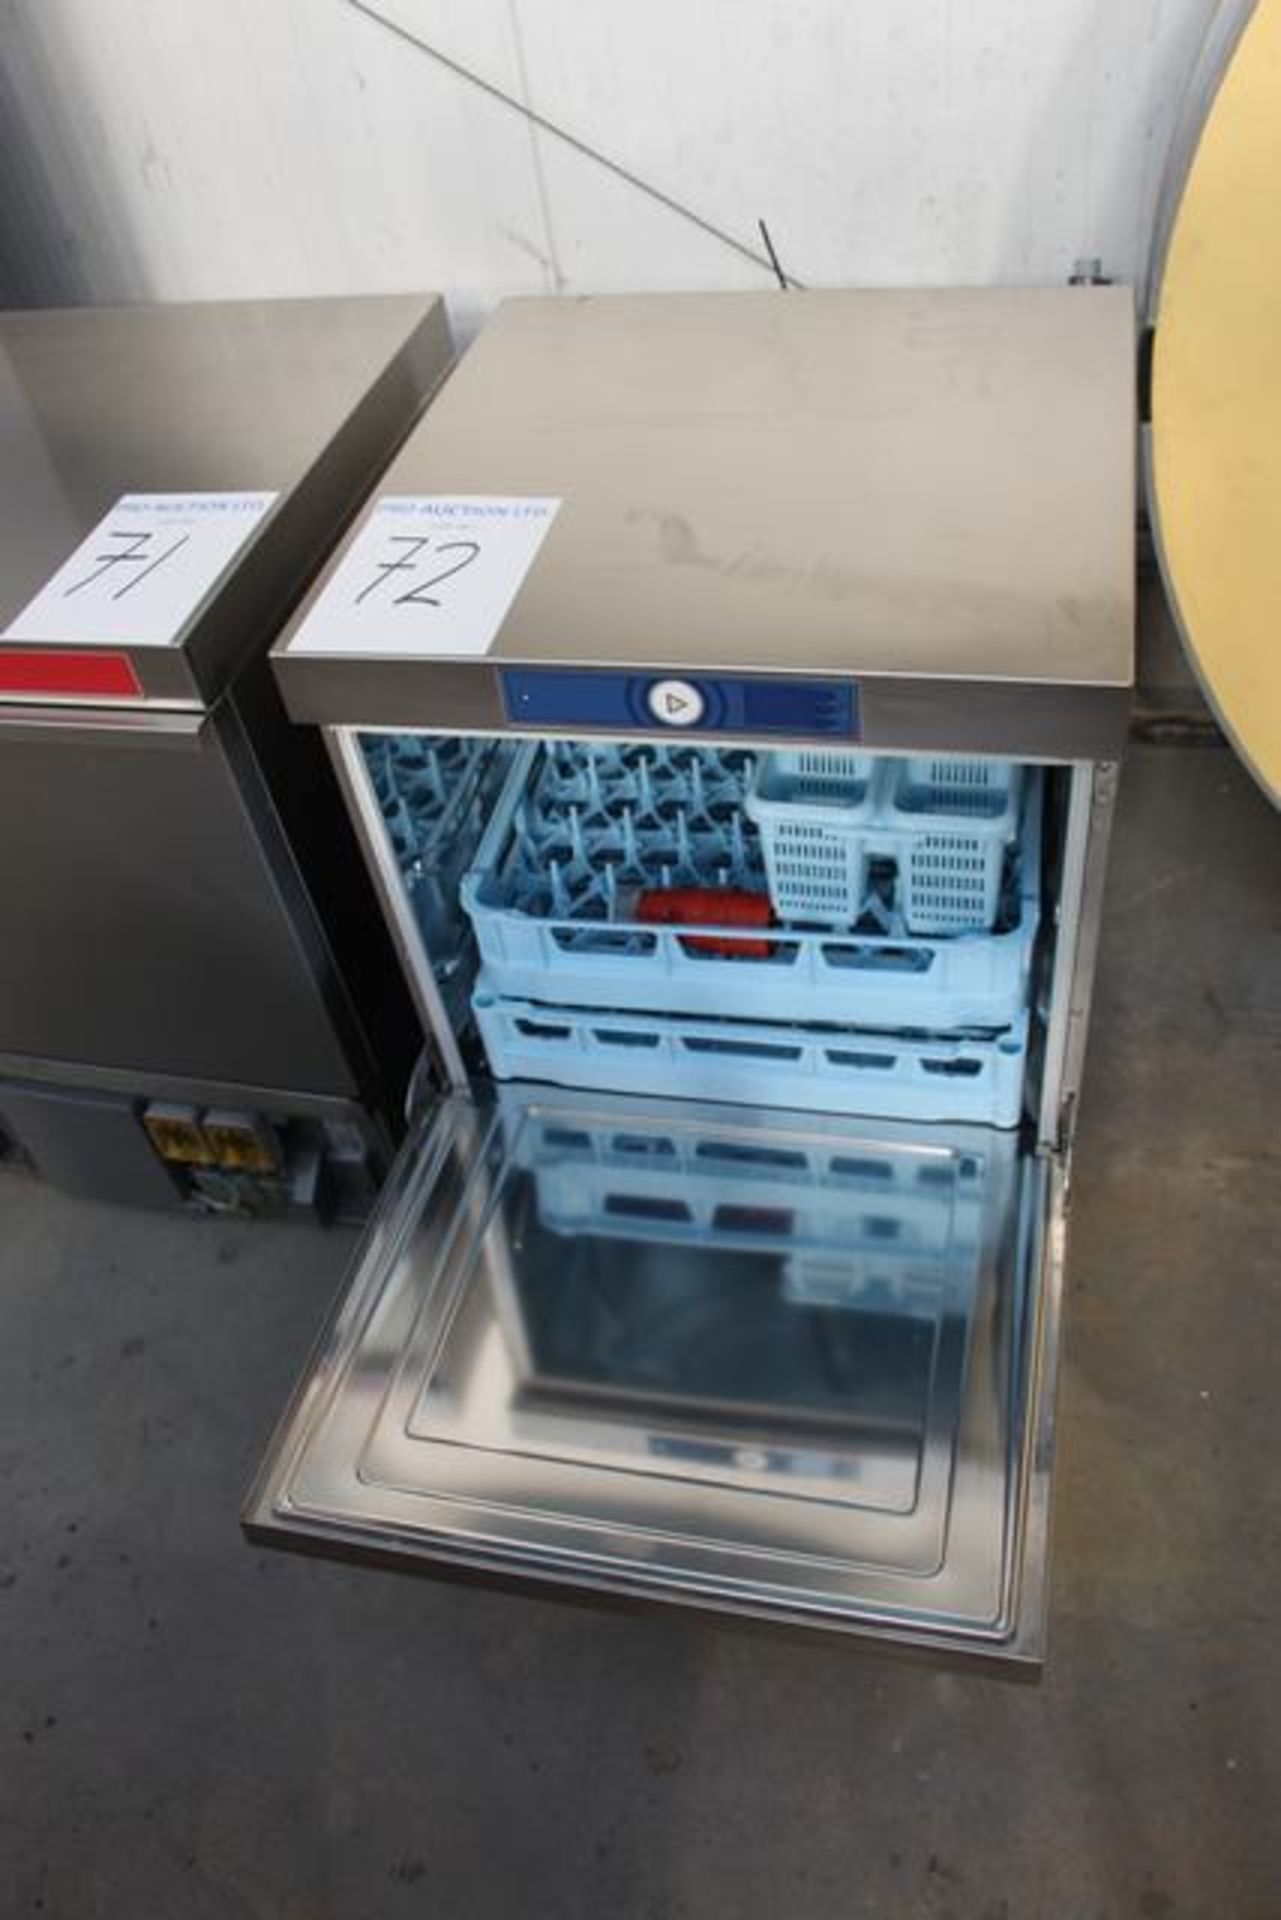 Hobart PROFI FXS-10A undercounter dishwasher with softener Cycle 90,180 300 seconds Up to 40 racks - Image 2 of 2